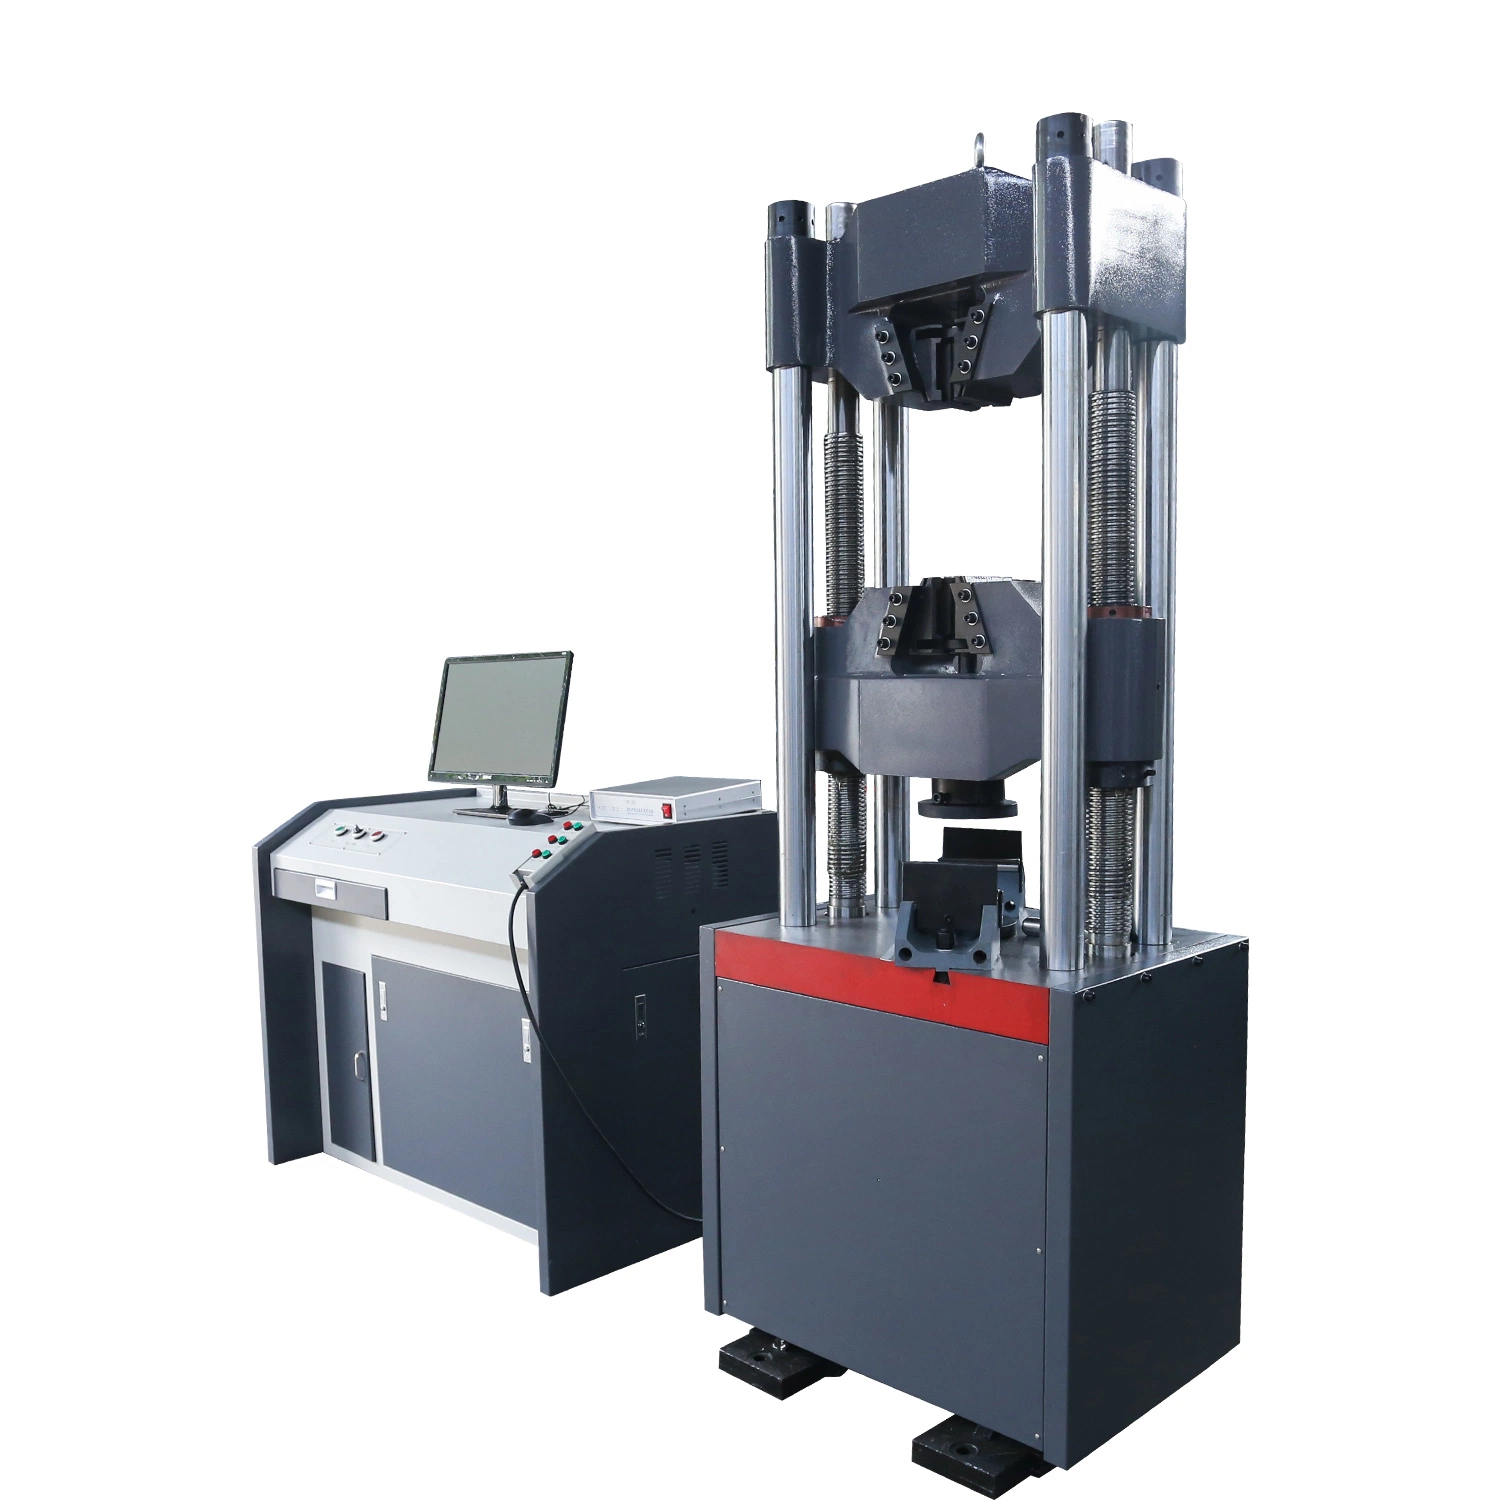 High-Quality Steel Bar Tensile Strength Hydraulic Universal Testing Machine for Material Testing Laboratory